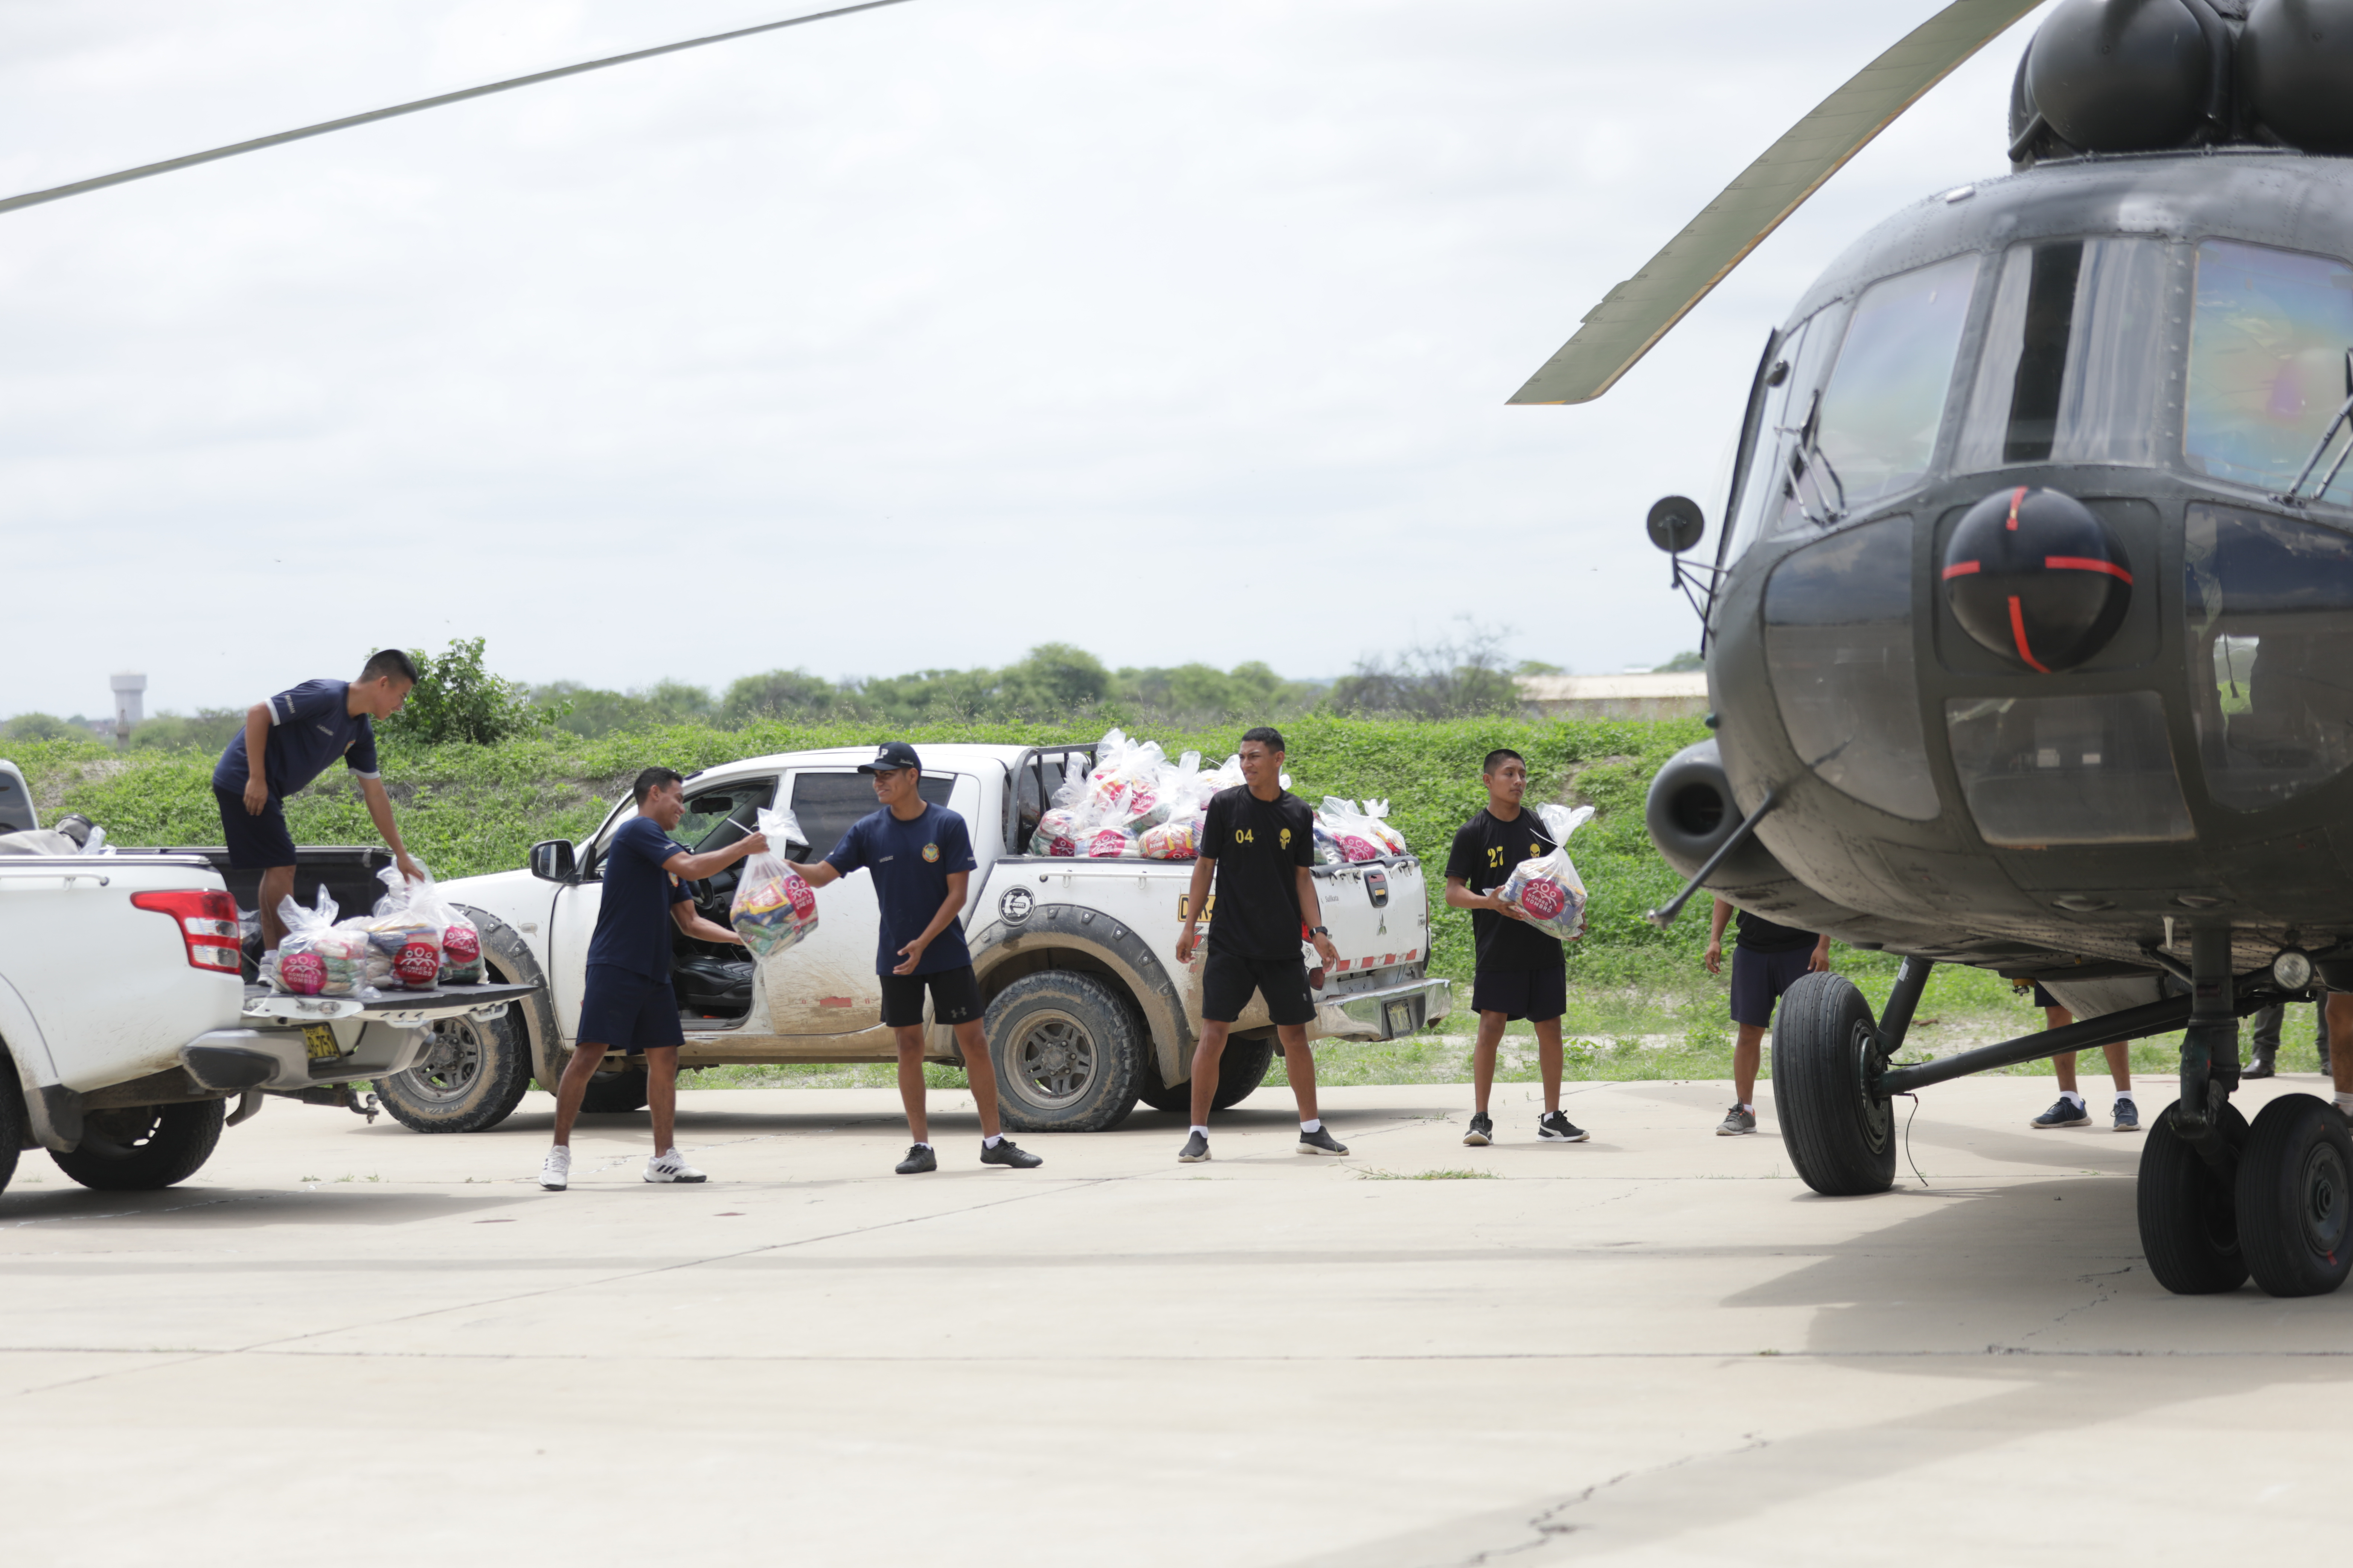 Young men in black uniforms form a line between a chopper and pickup trucks, passing bags of humanitarian aid to each other to load up the trucks.